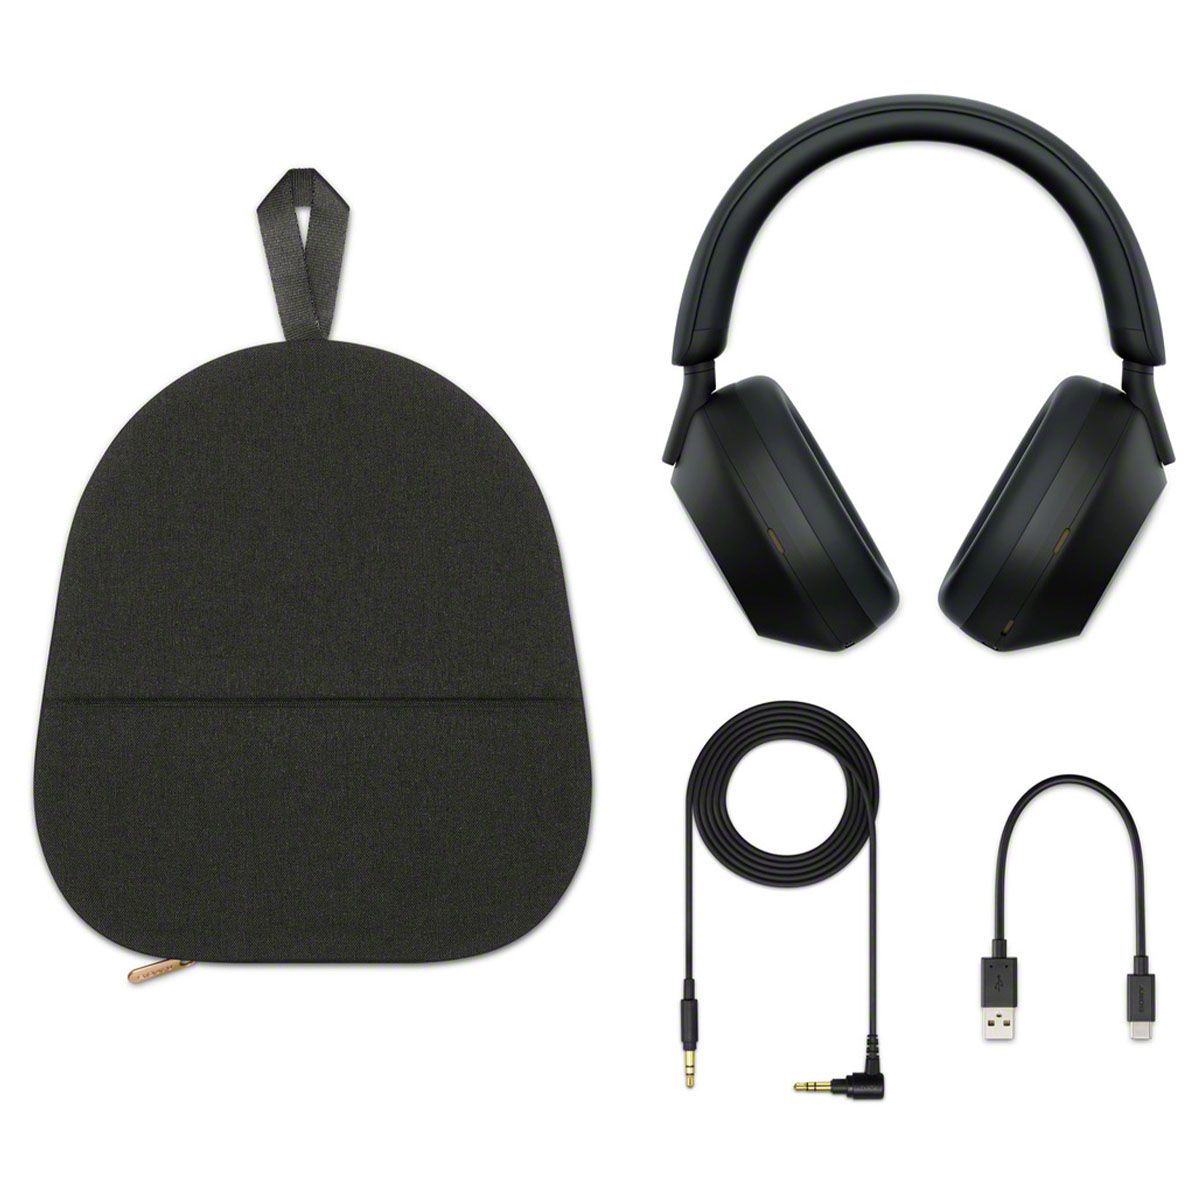 Sony WH-1000XM5 Wireless Over-Ear Headphones - Black - Photo showing what's in the box - headphones, case, cables